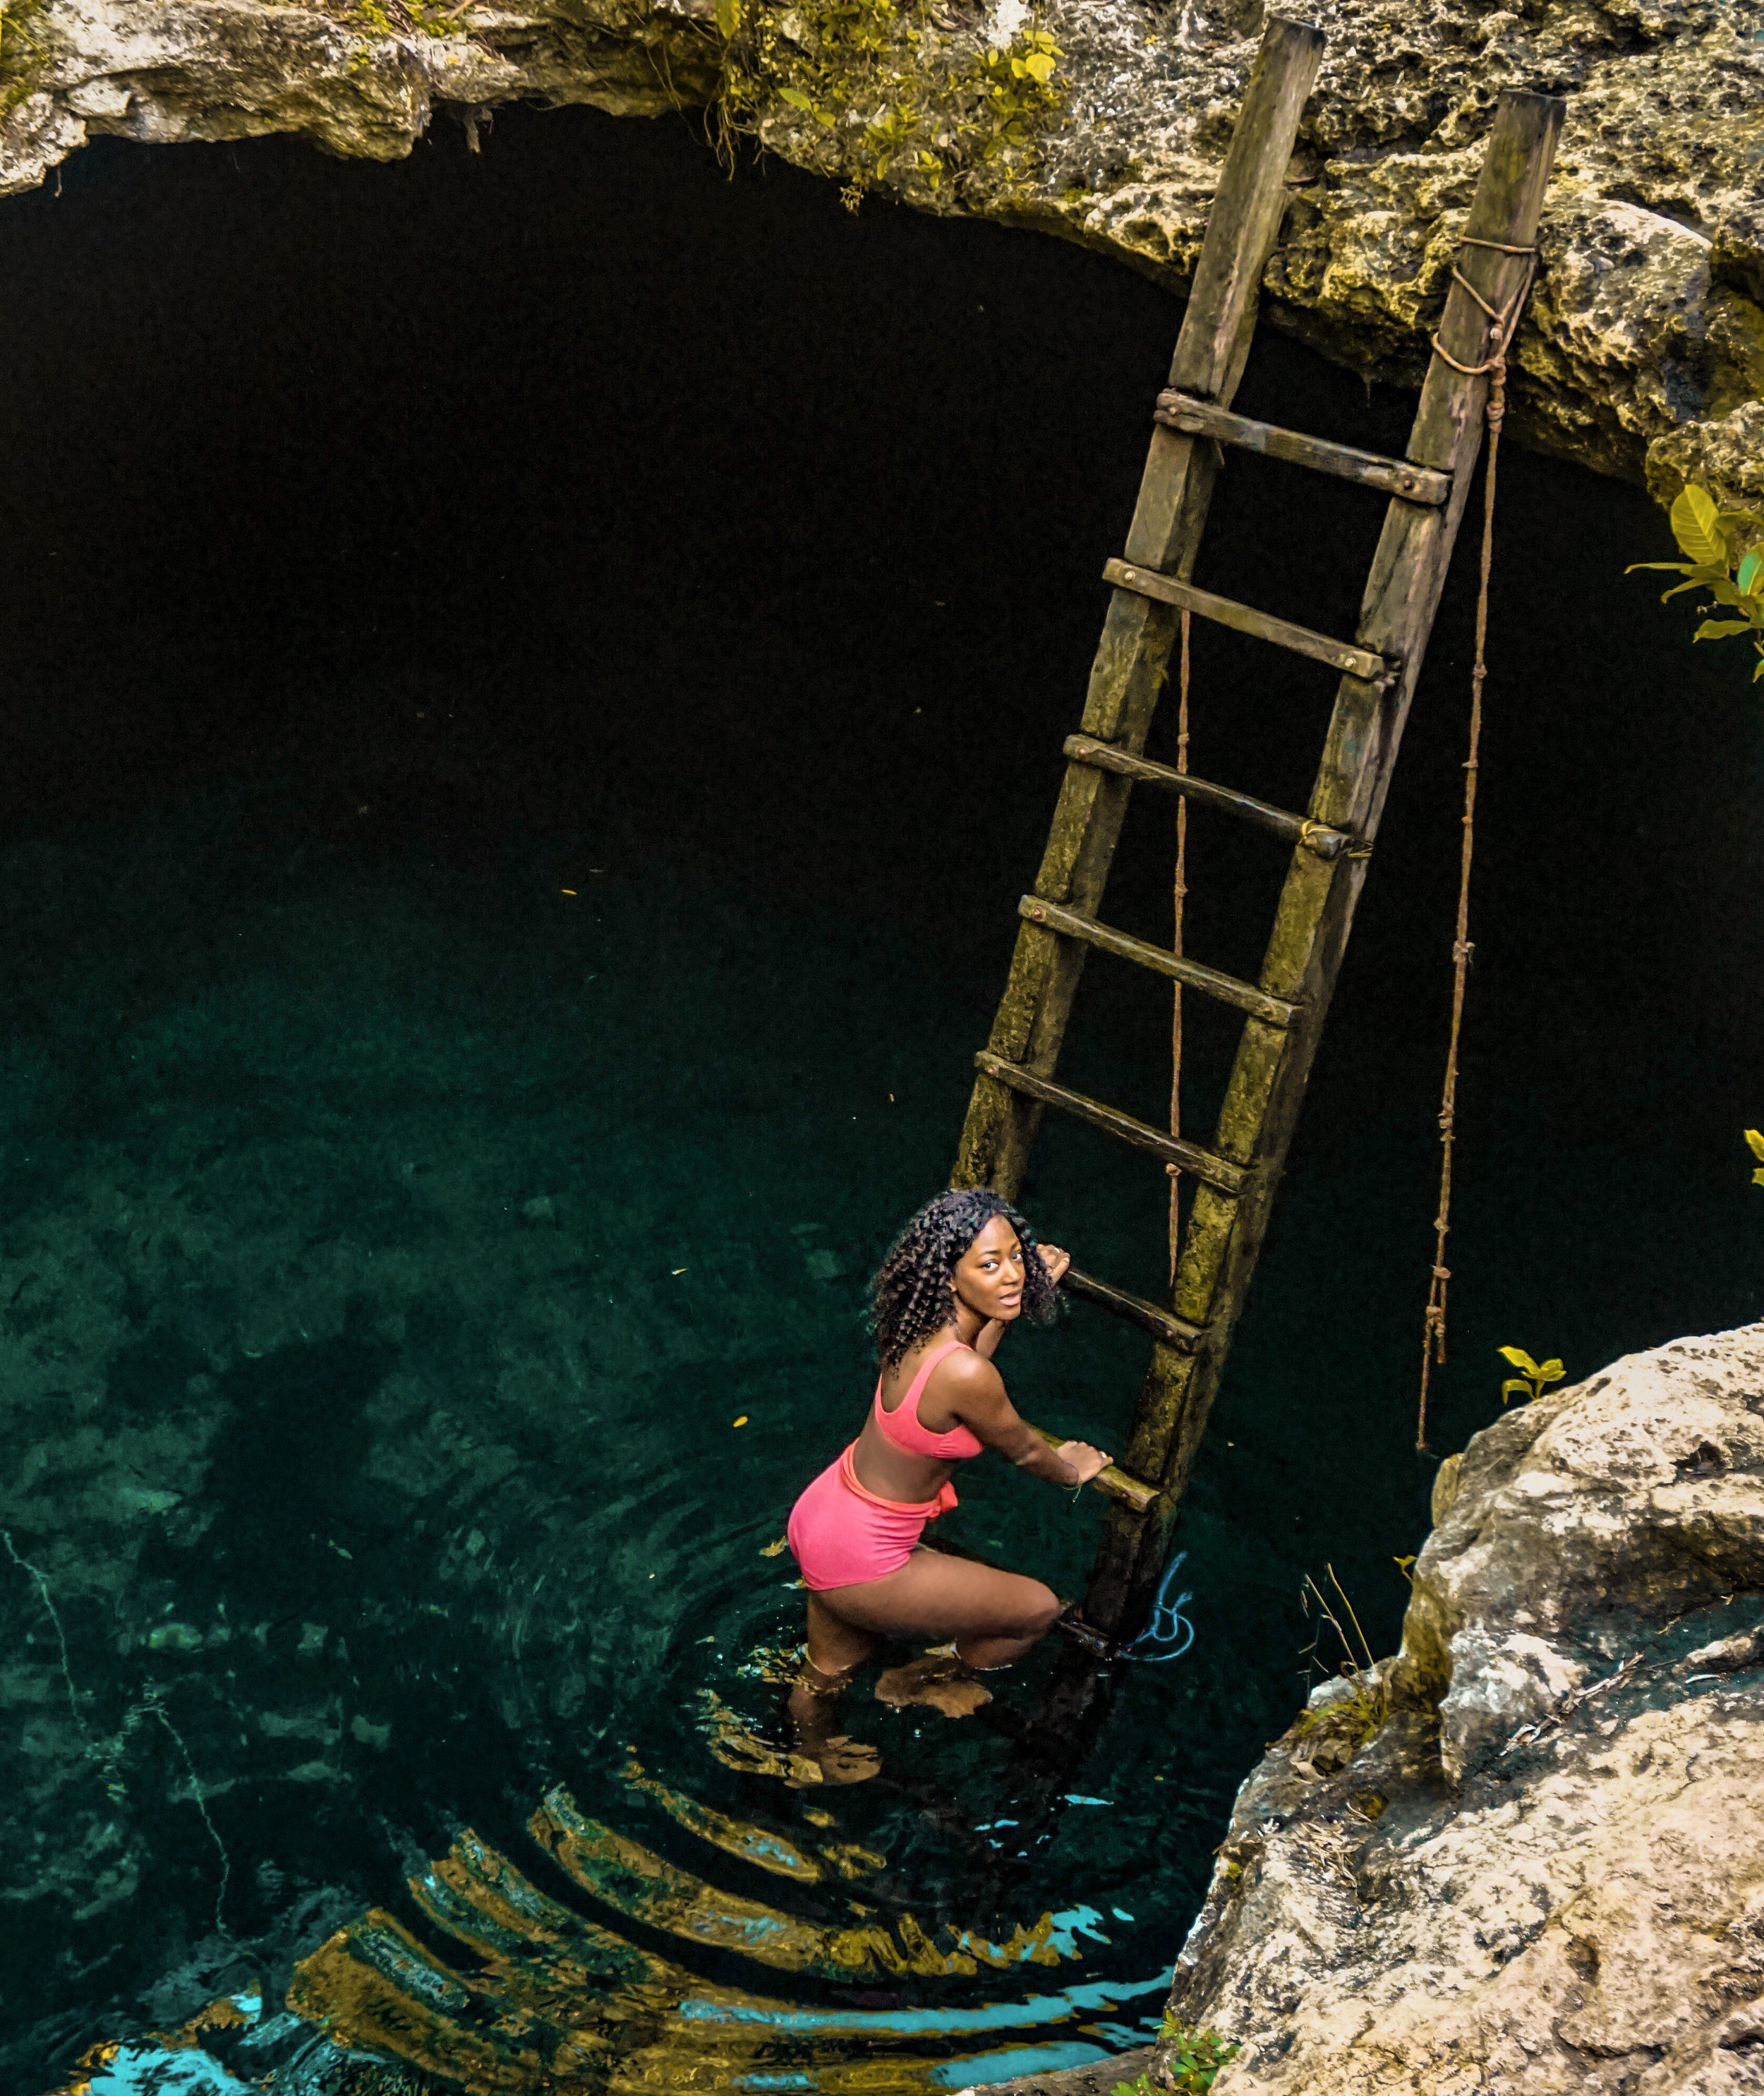 I discovered this low-key cenote in Mexico while scrolling through Instagram one day. This particular photo was taken by travelers who were there to have fun just like me! This photo took less than five minutes, but I stayed in this Cenote for aroun…